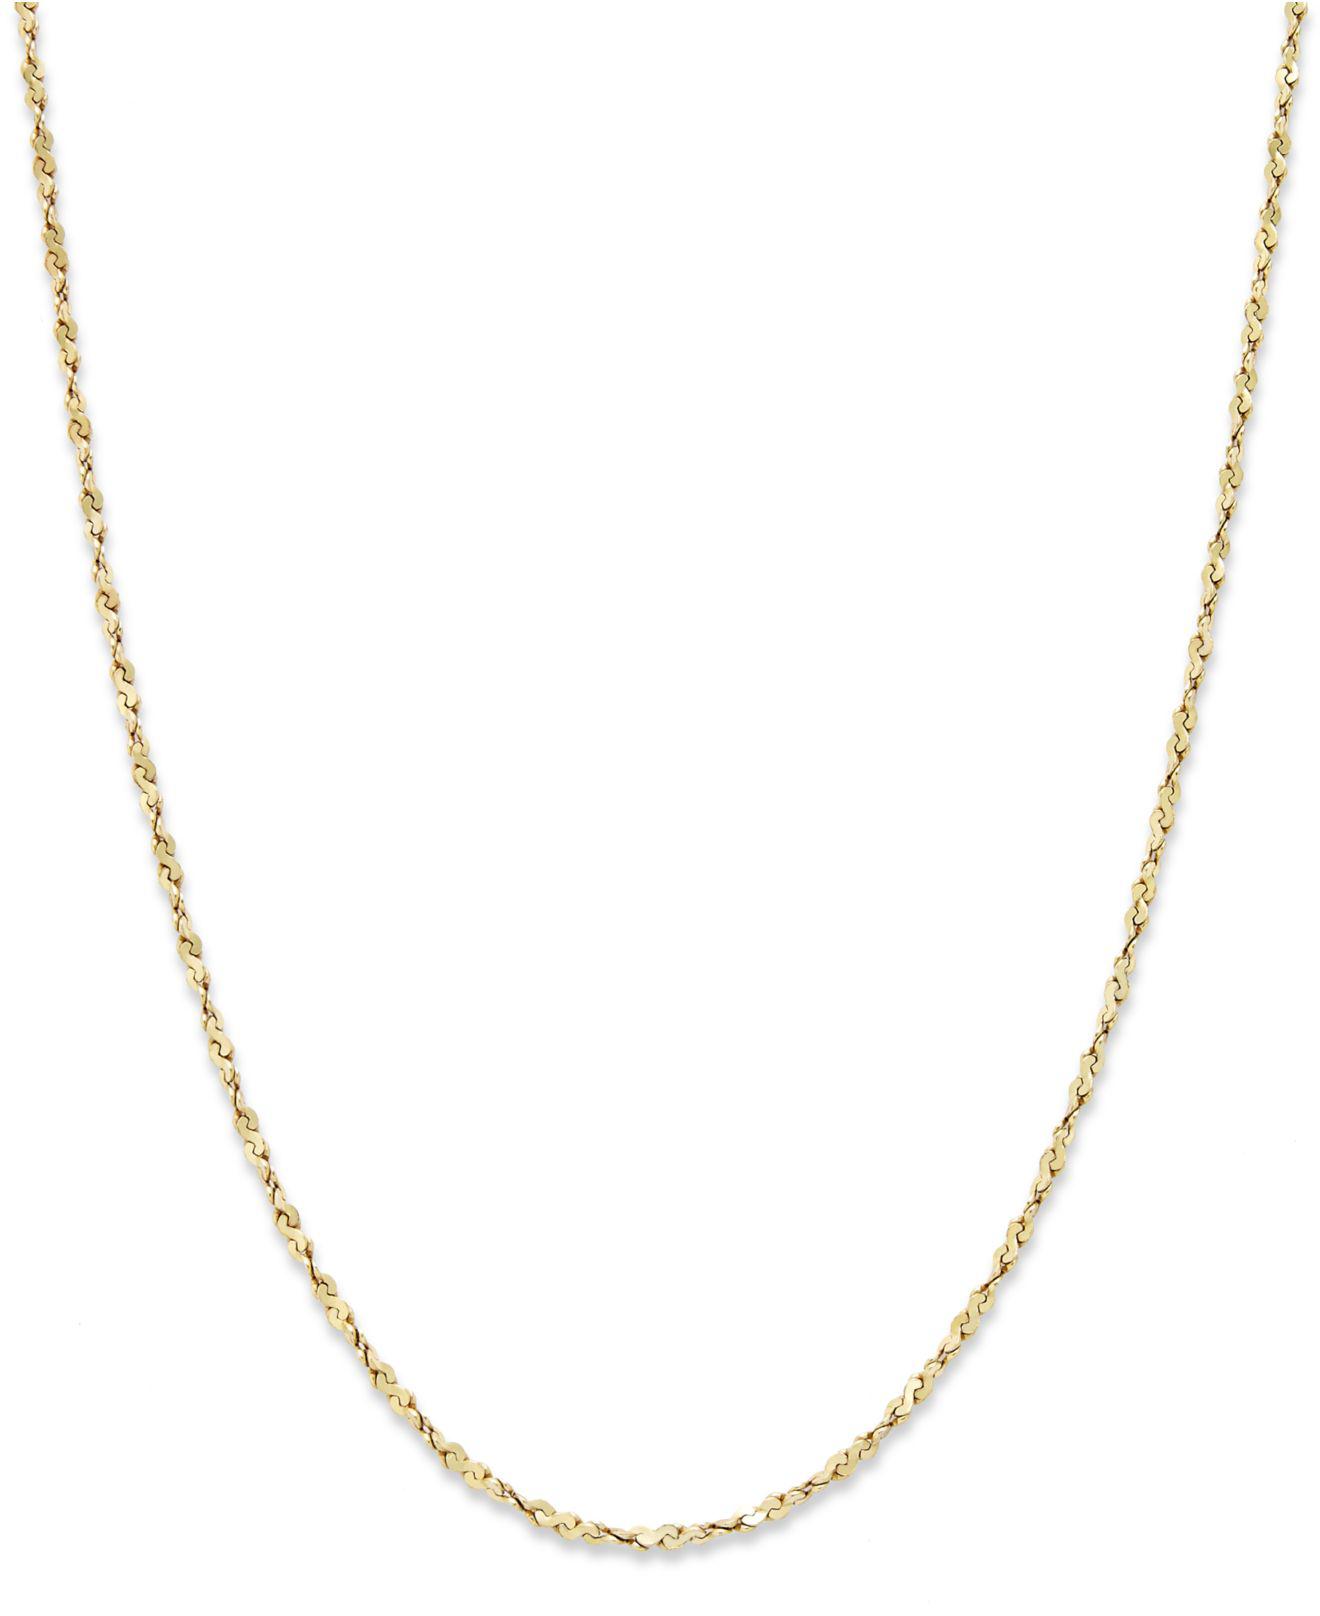 Giani Bernini 18k Gold Over Sterling Silver Necklace, 30 ...